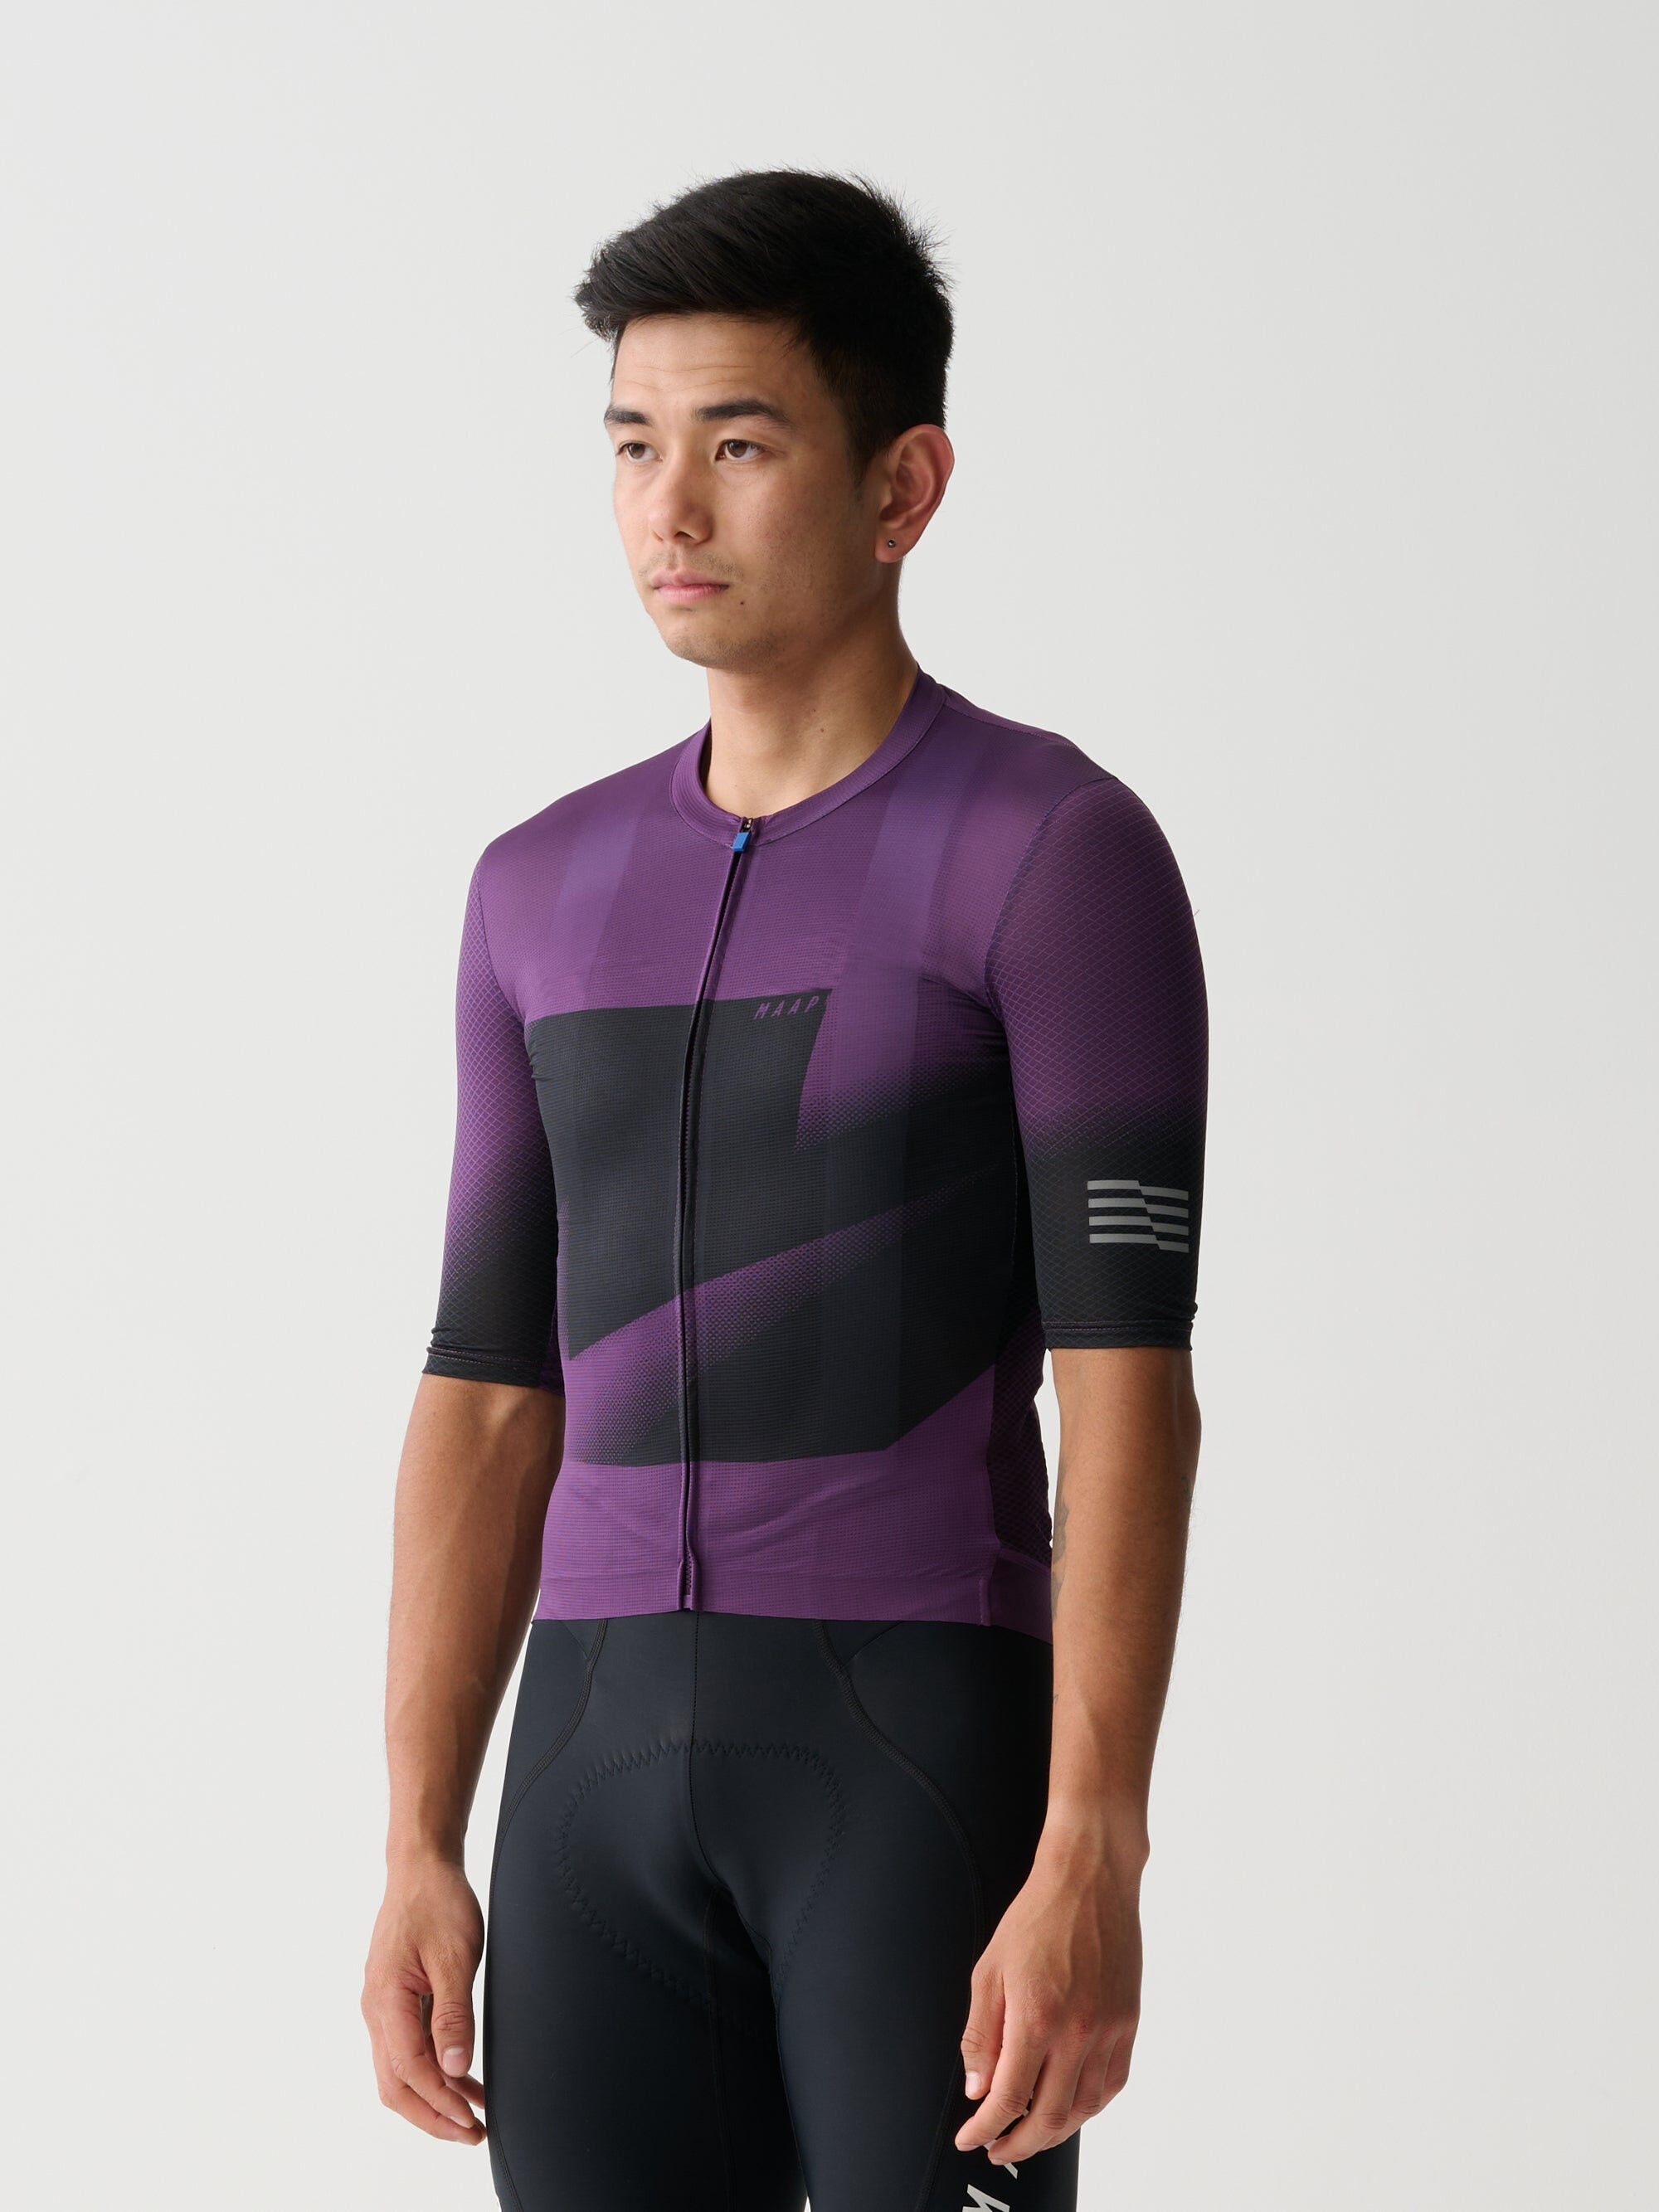 Maap Evolve 3D Pro Air Jersey 2.0 - Maglia ciclismo - Uomo | Hardloop